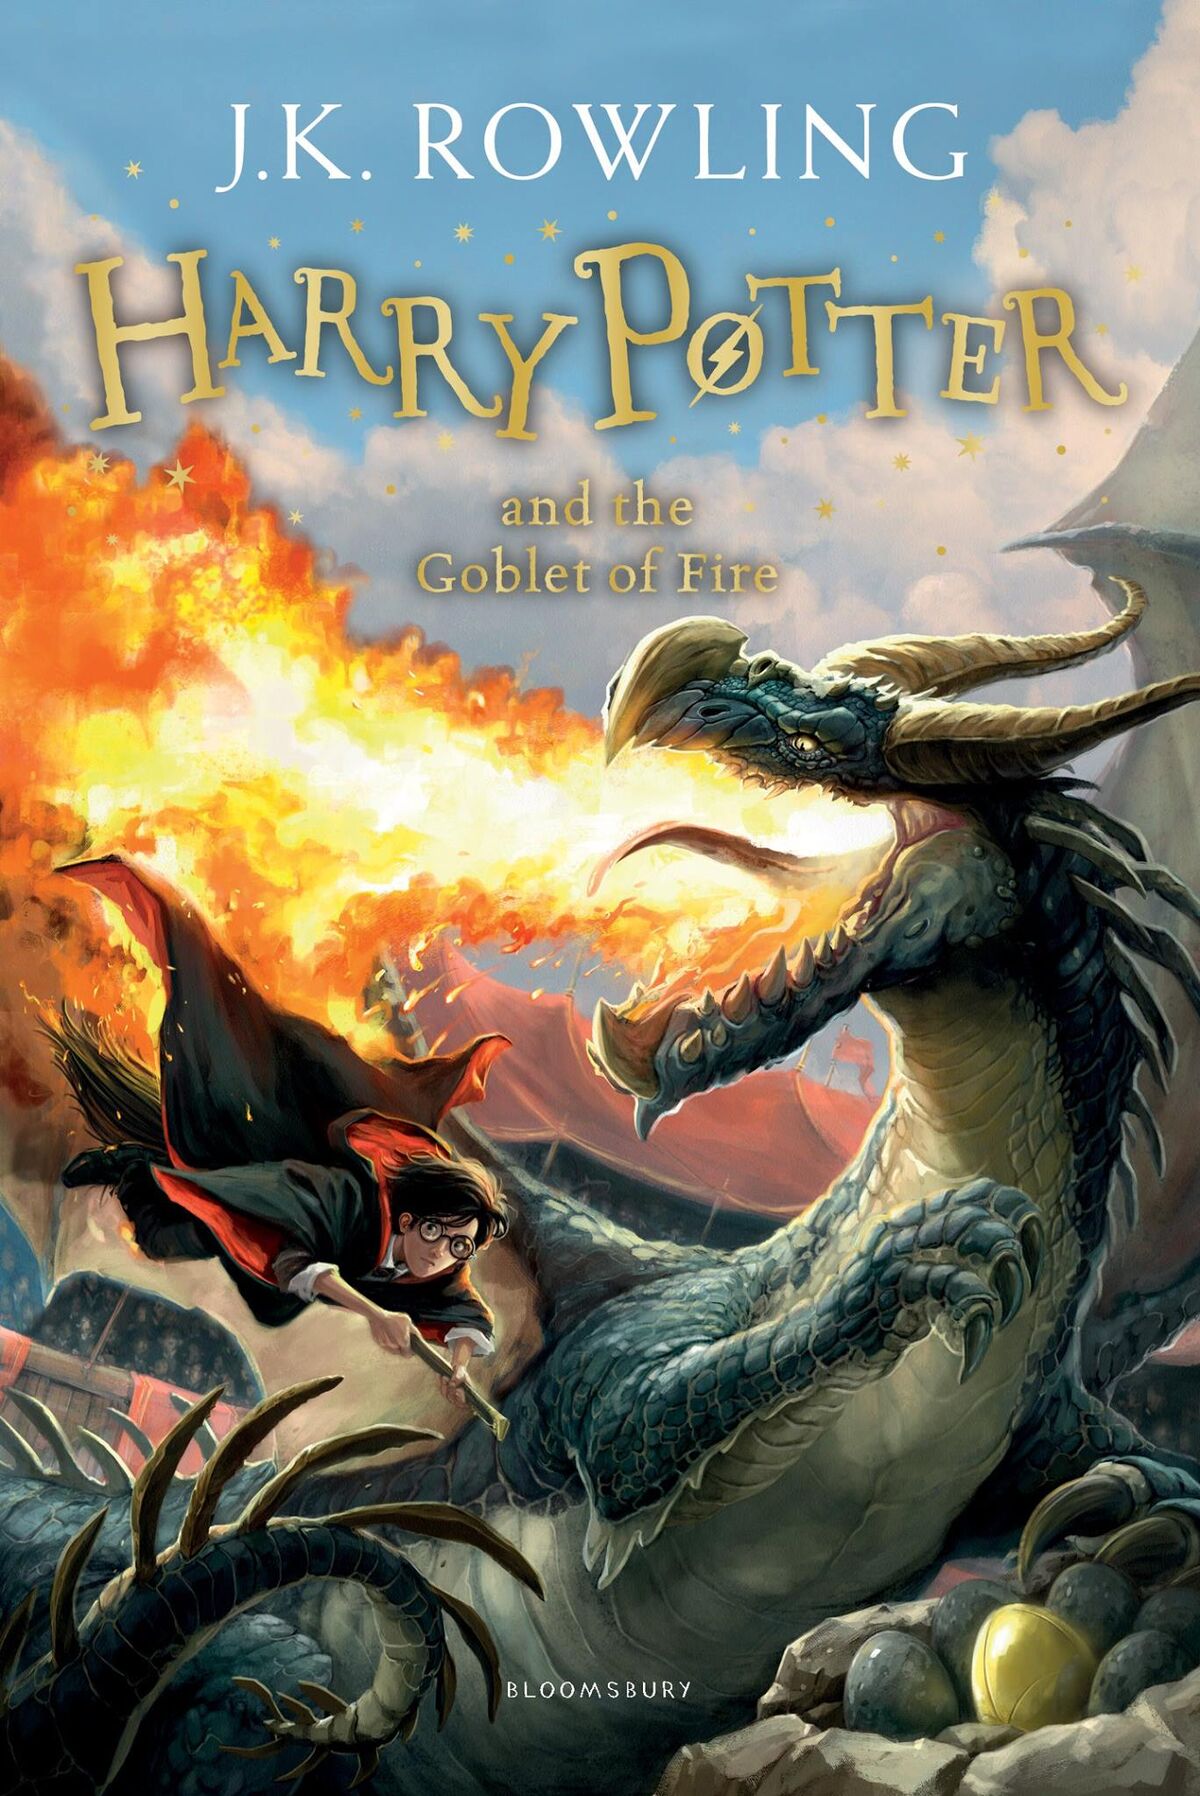 Harry Potter and the Goblet of Fire Movie Review for Parents